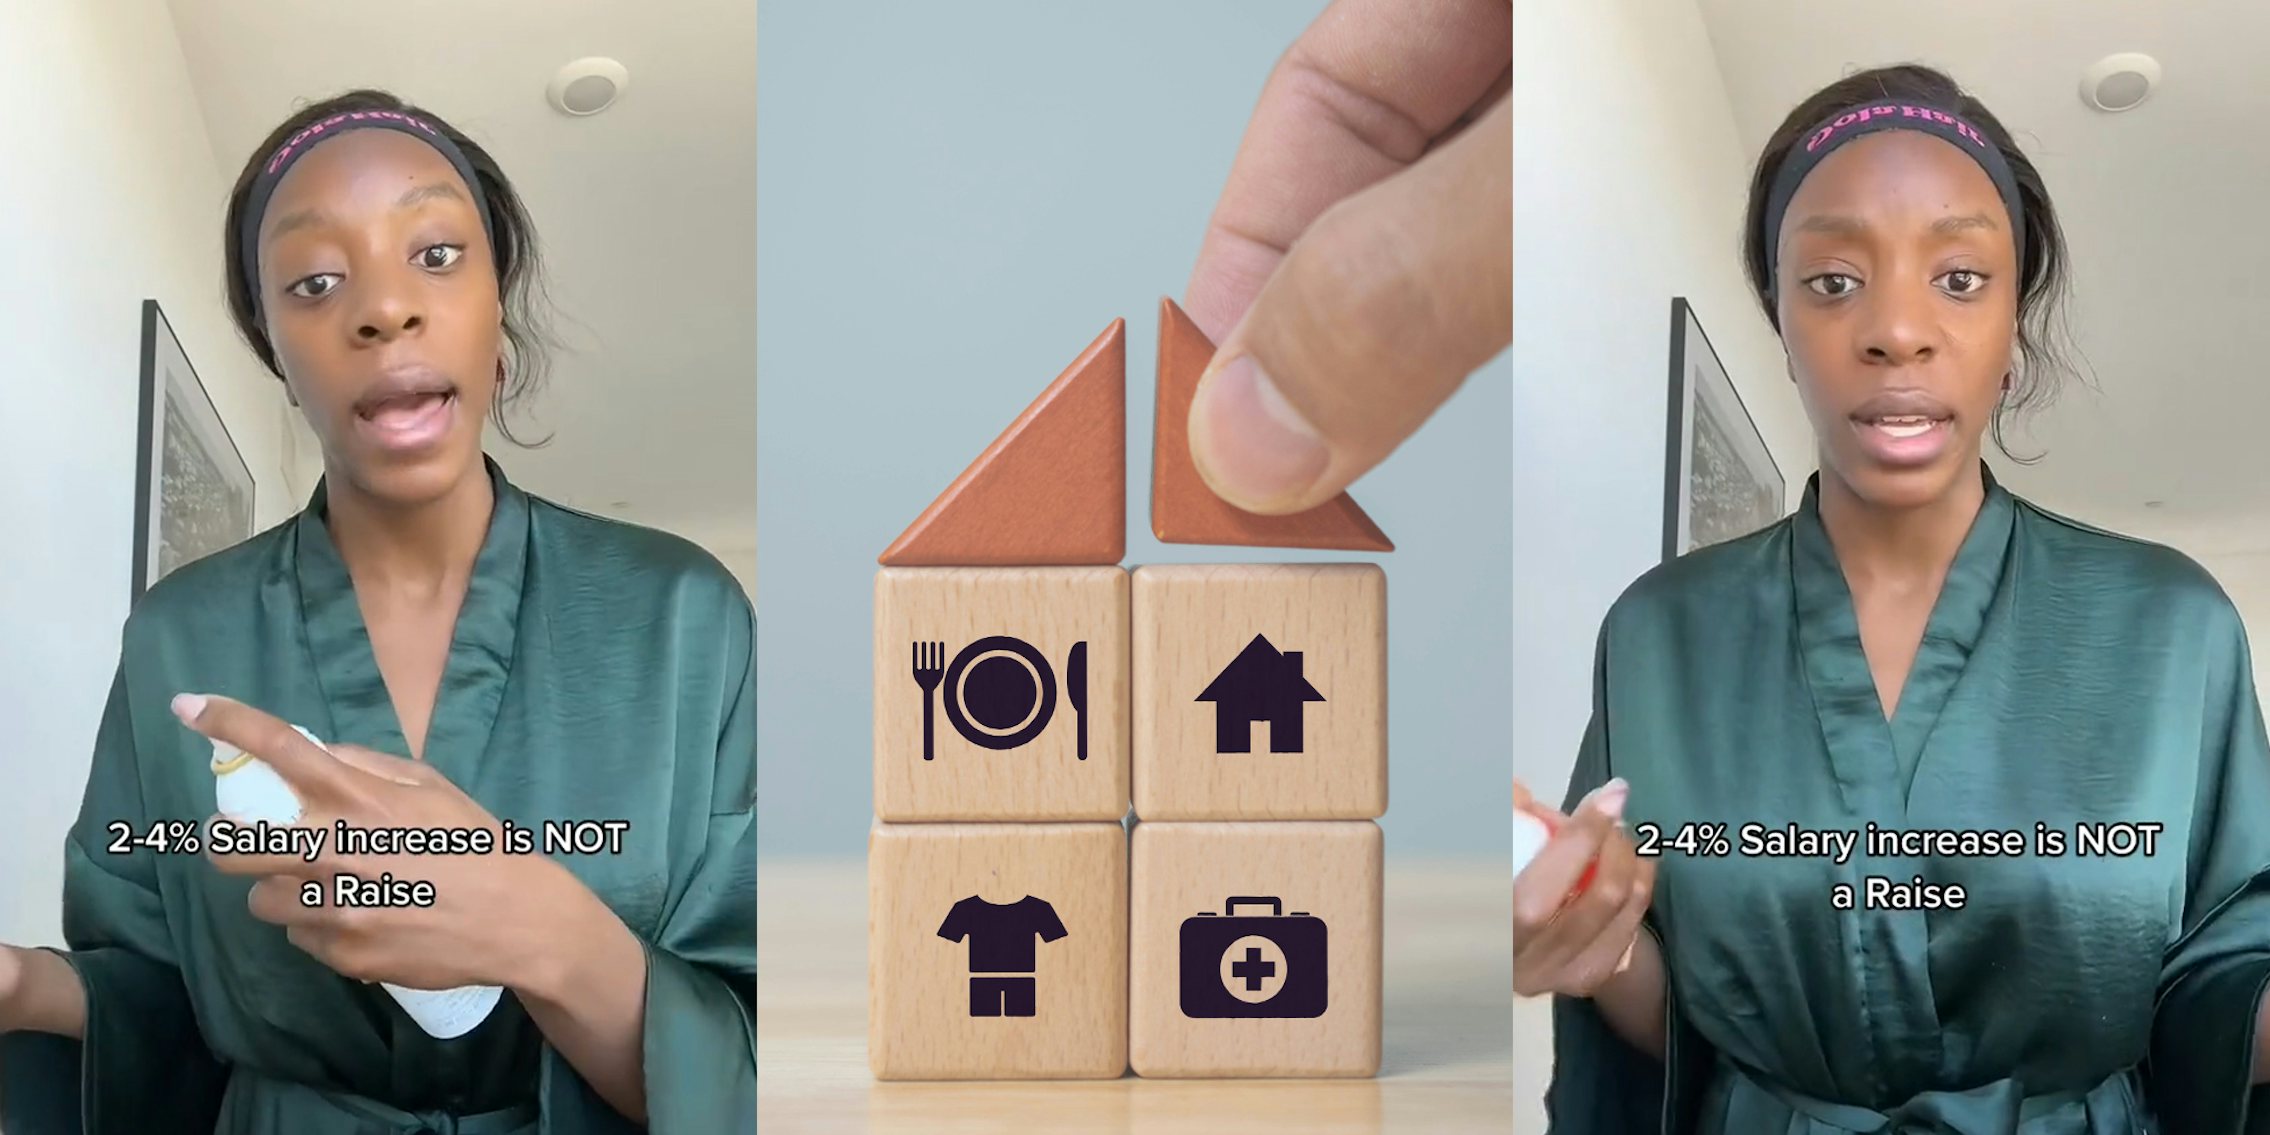 woman speaking with caption '2-4% Salary increase in NOT a Raise' (l) wooden blocks with basic human needs with fingers placing roof block in front of grey background col concept (c) woman speaking with caption '2-4% Salary increase in NOT a Raise' (r)